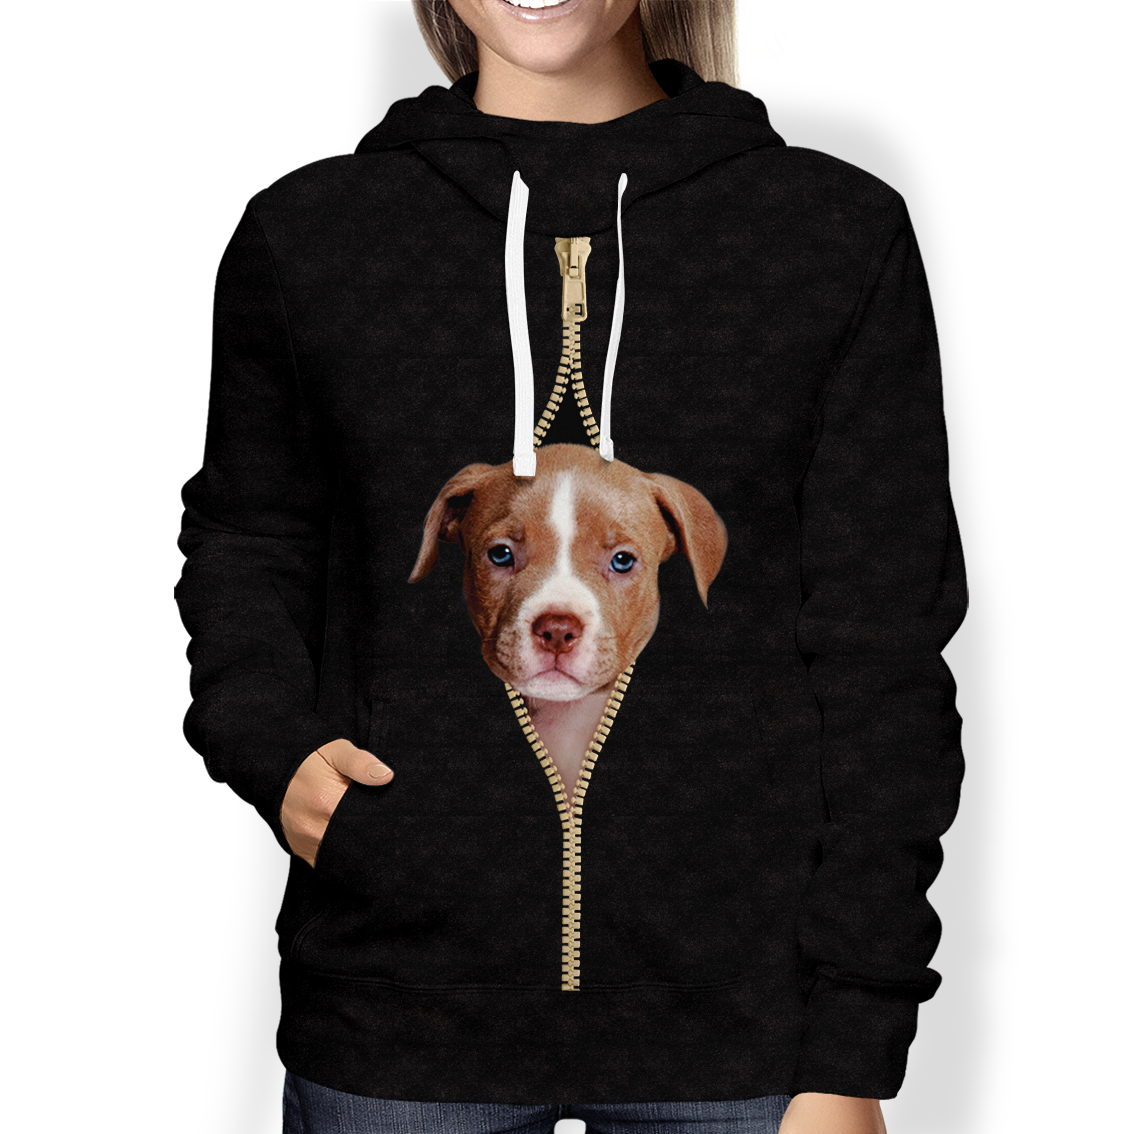 I'm With You - American Pitbull Terrier Hoodie V1